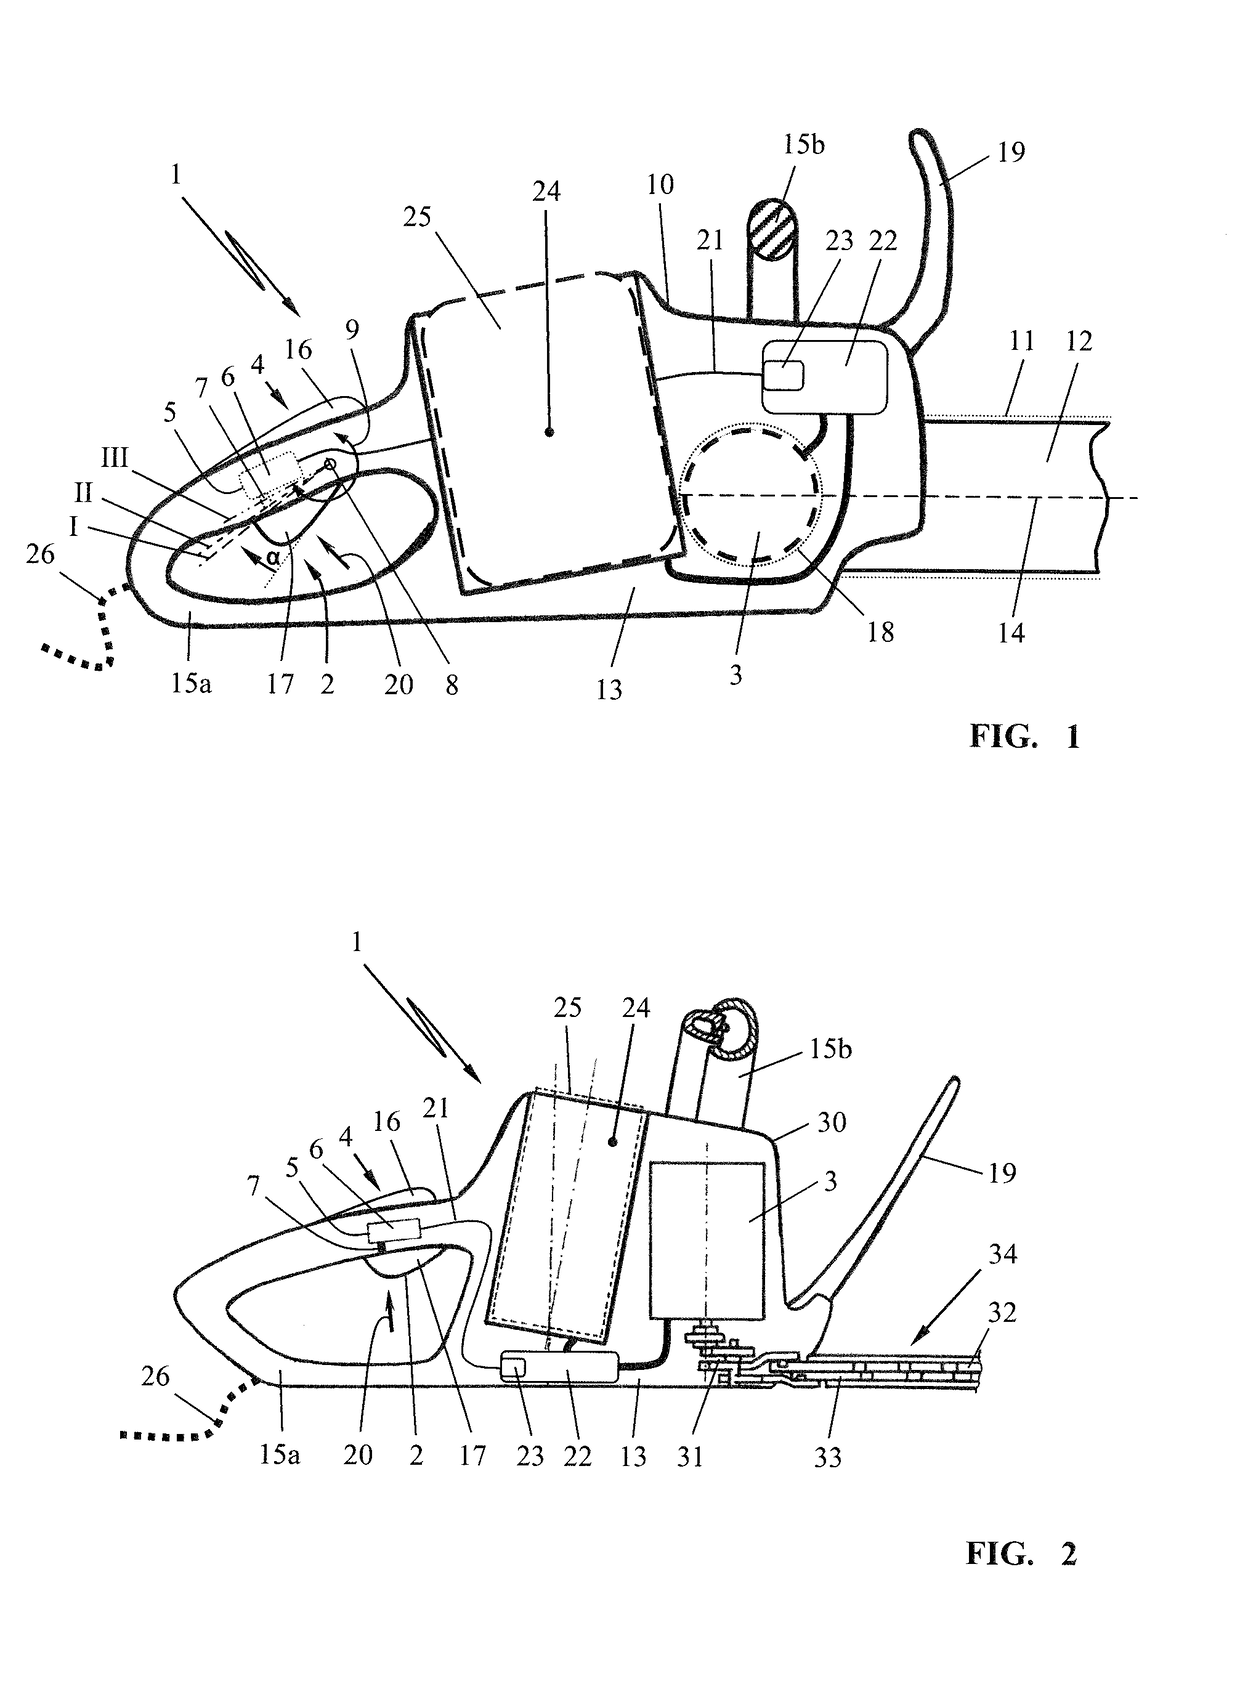 Handheld work apparatus having an electric motor and method for activating the same